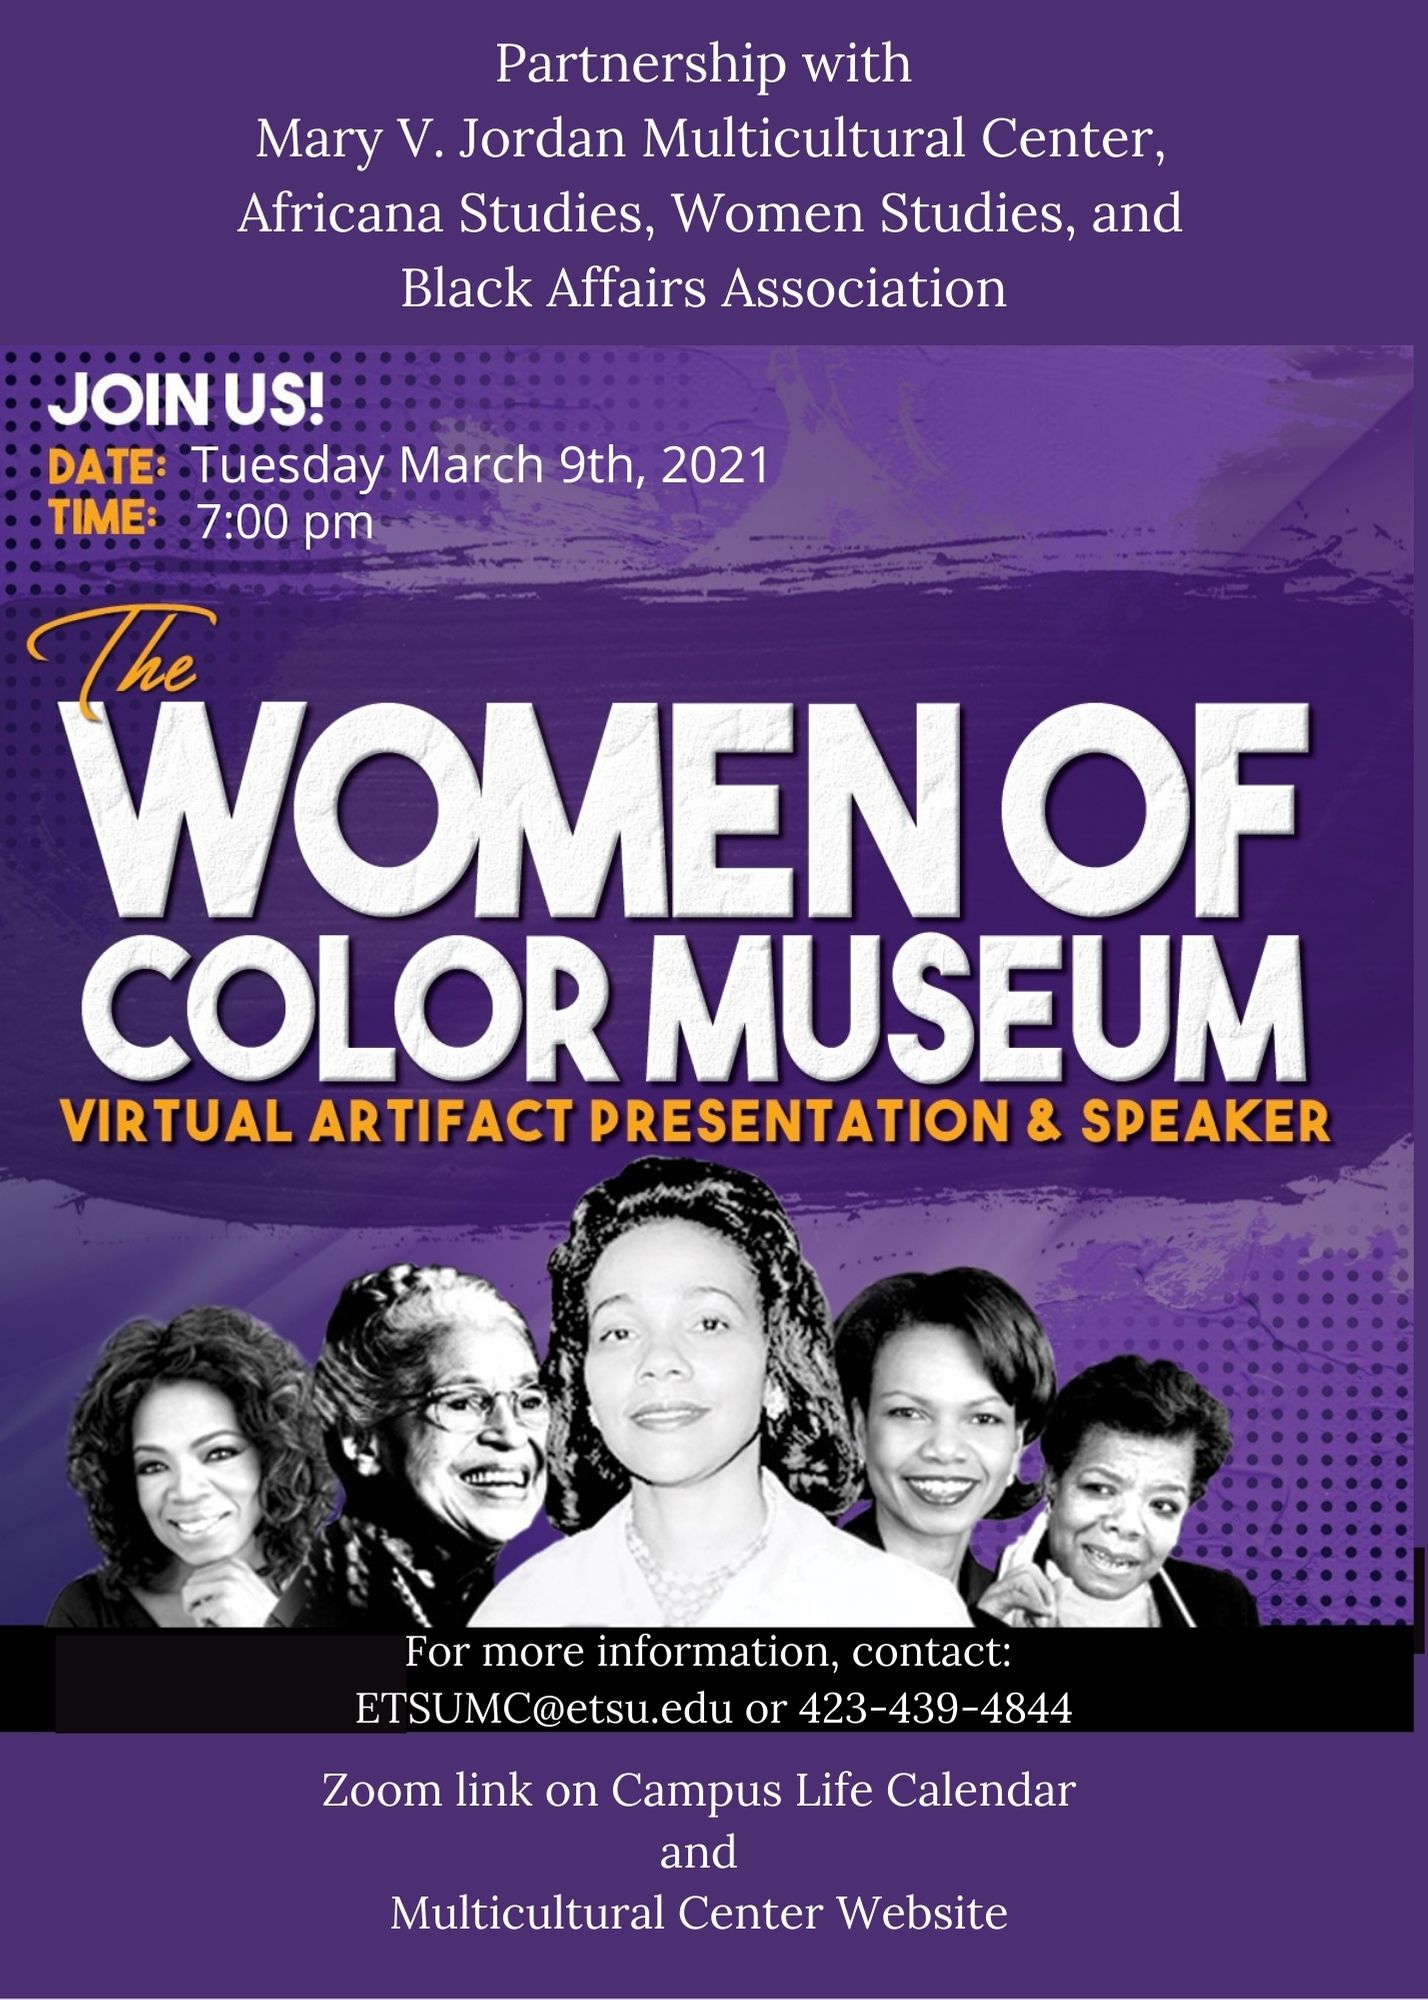 Women of color museum event flyer